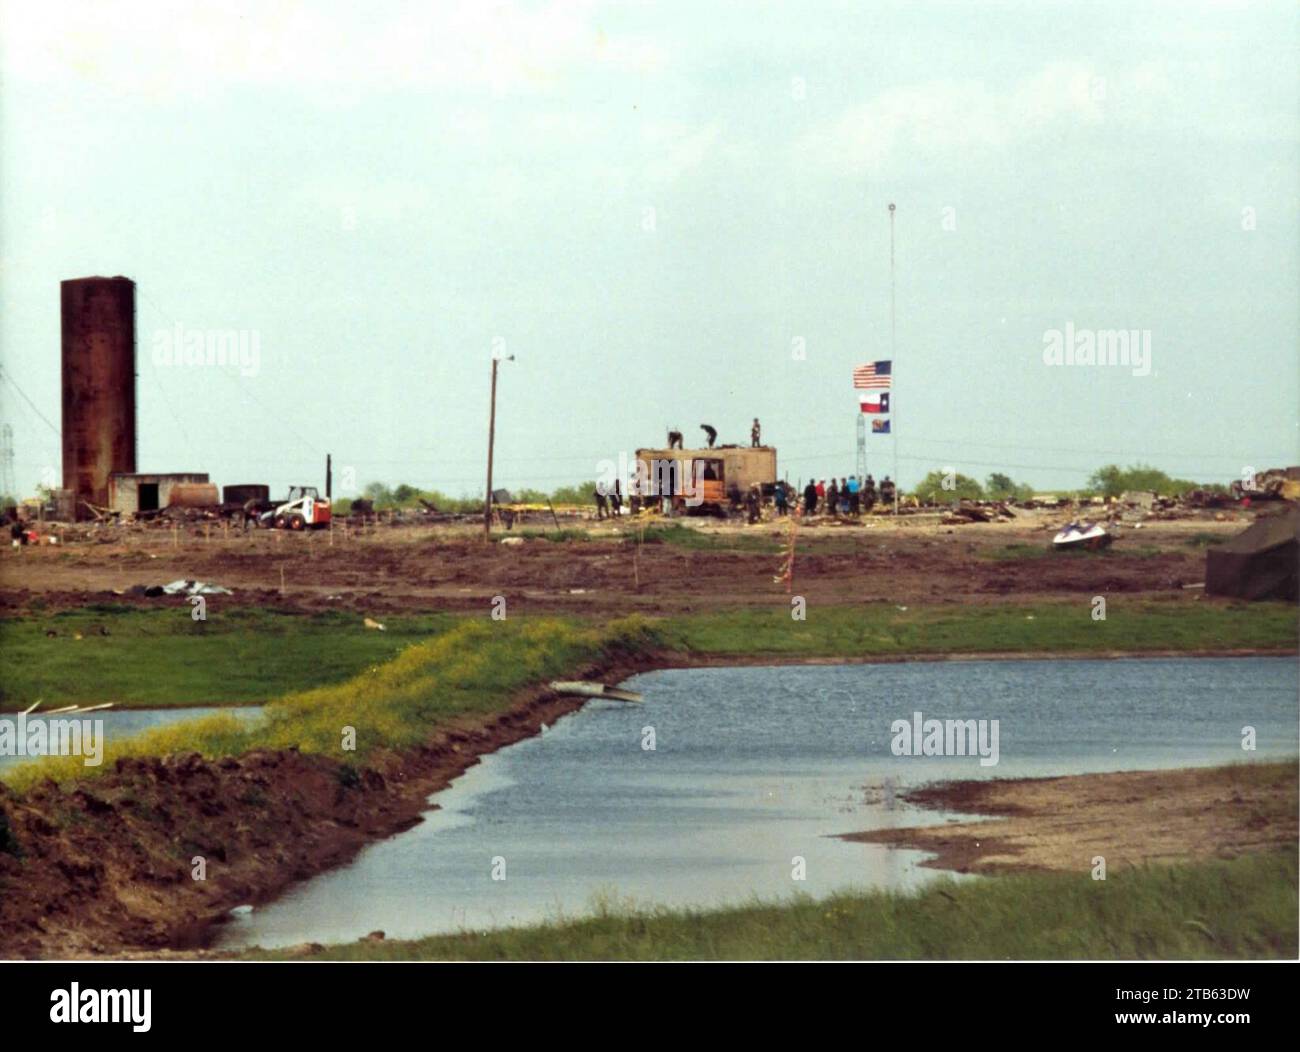 Waco Siege – ATF flies flag over remains of Branch Davidian compound. Stock Photo